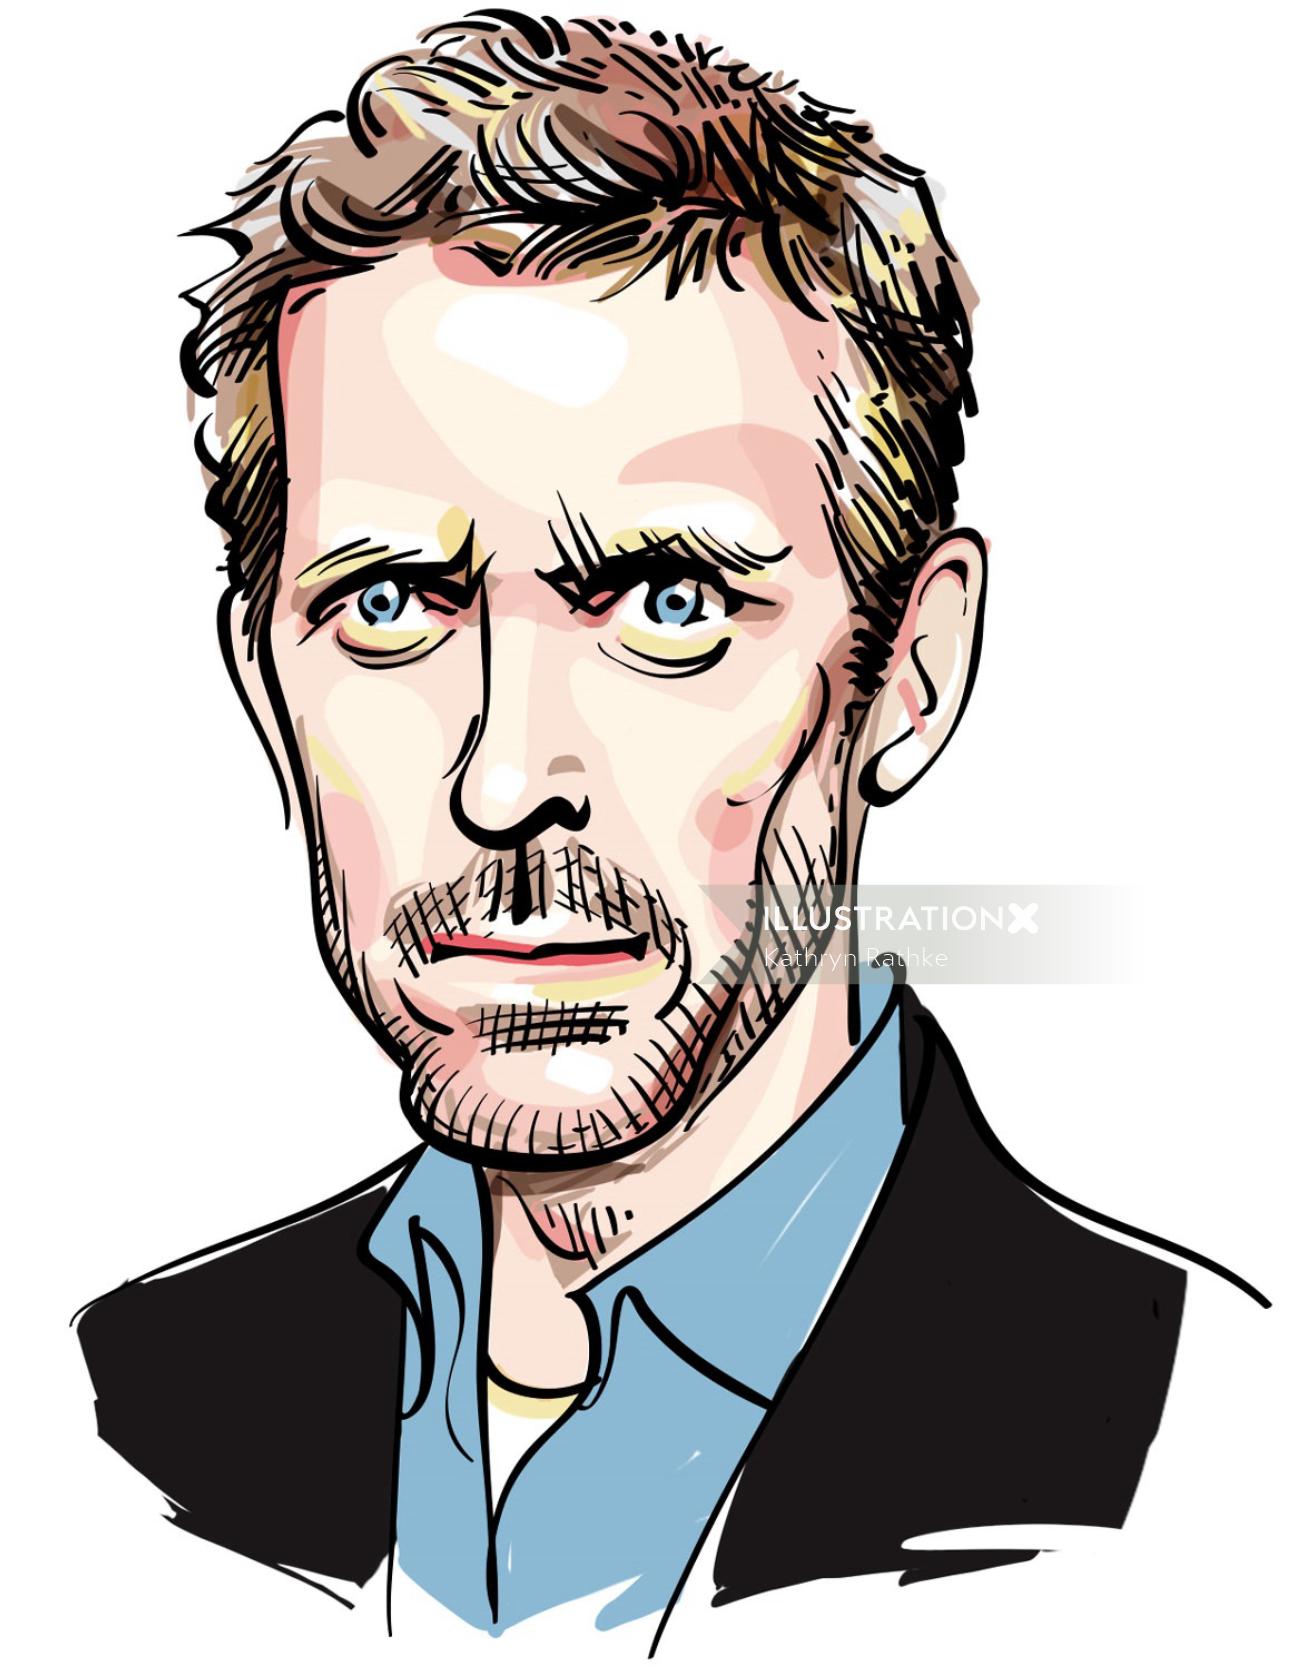 Portrayal of English actor "Hugh Laurie"